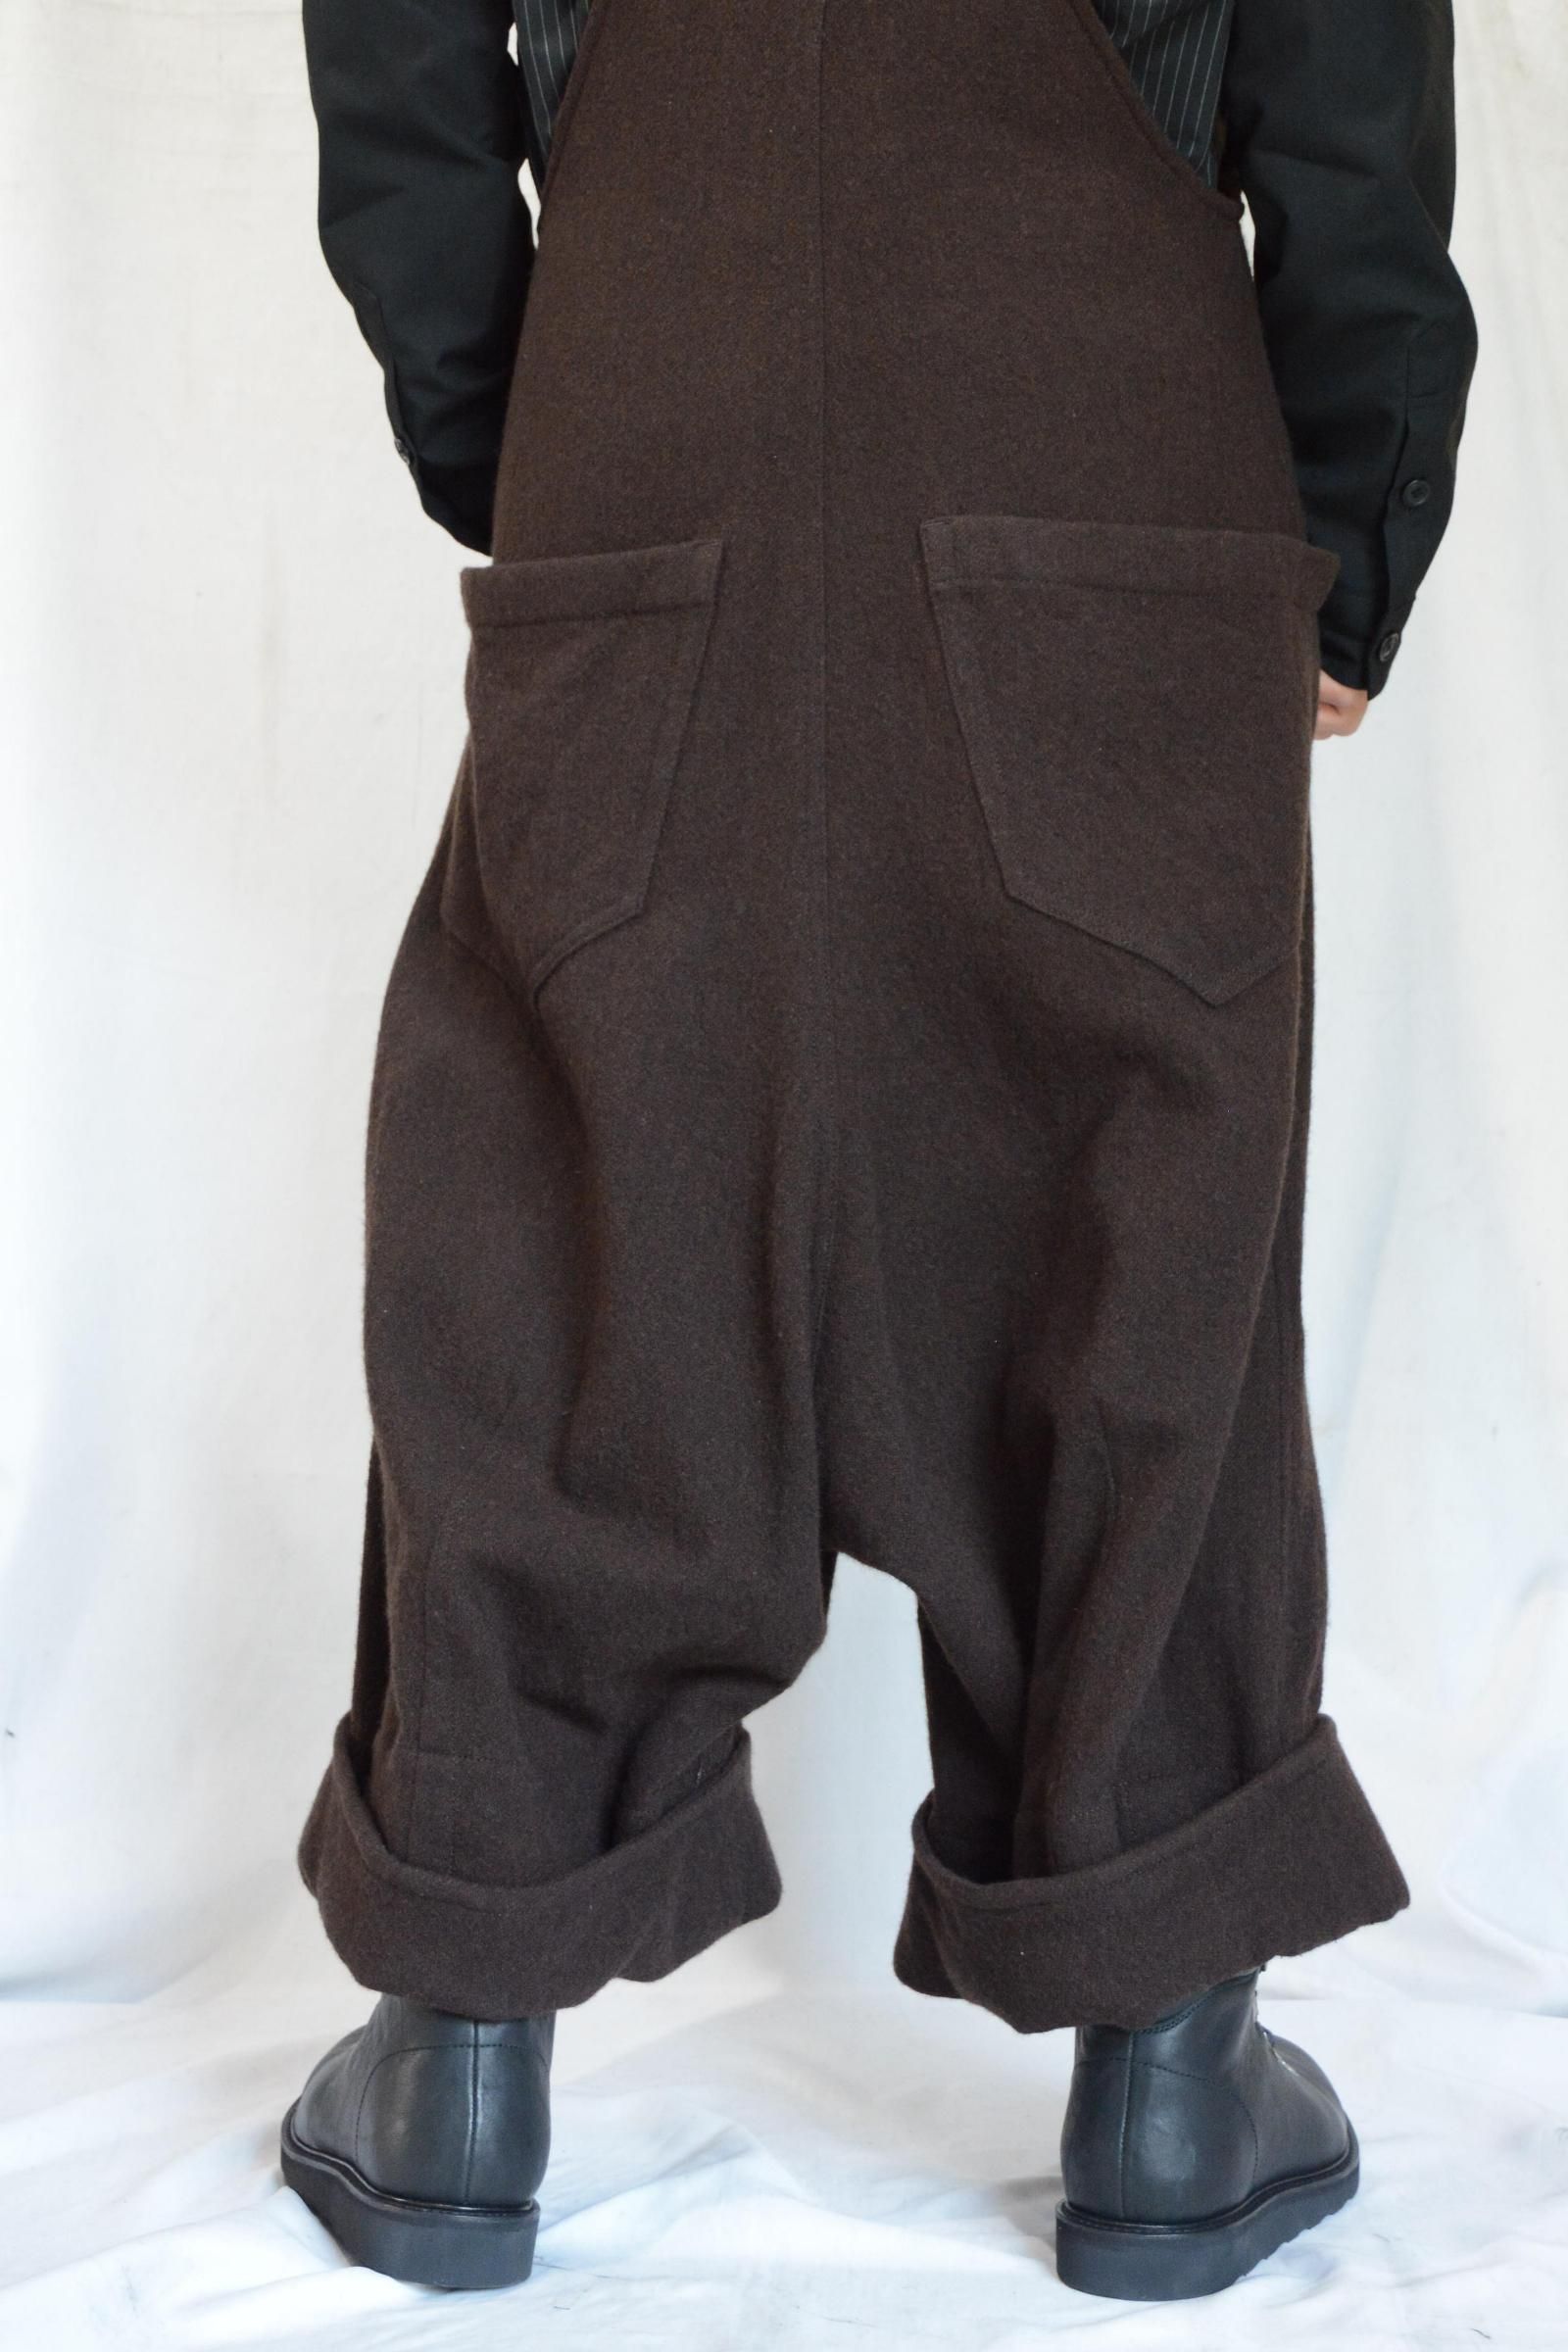 Ground Y - Jumping overalls | chord online store